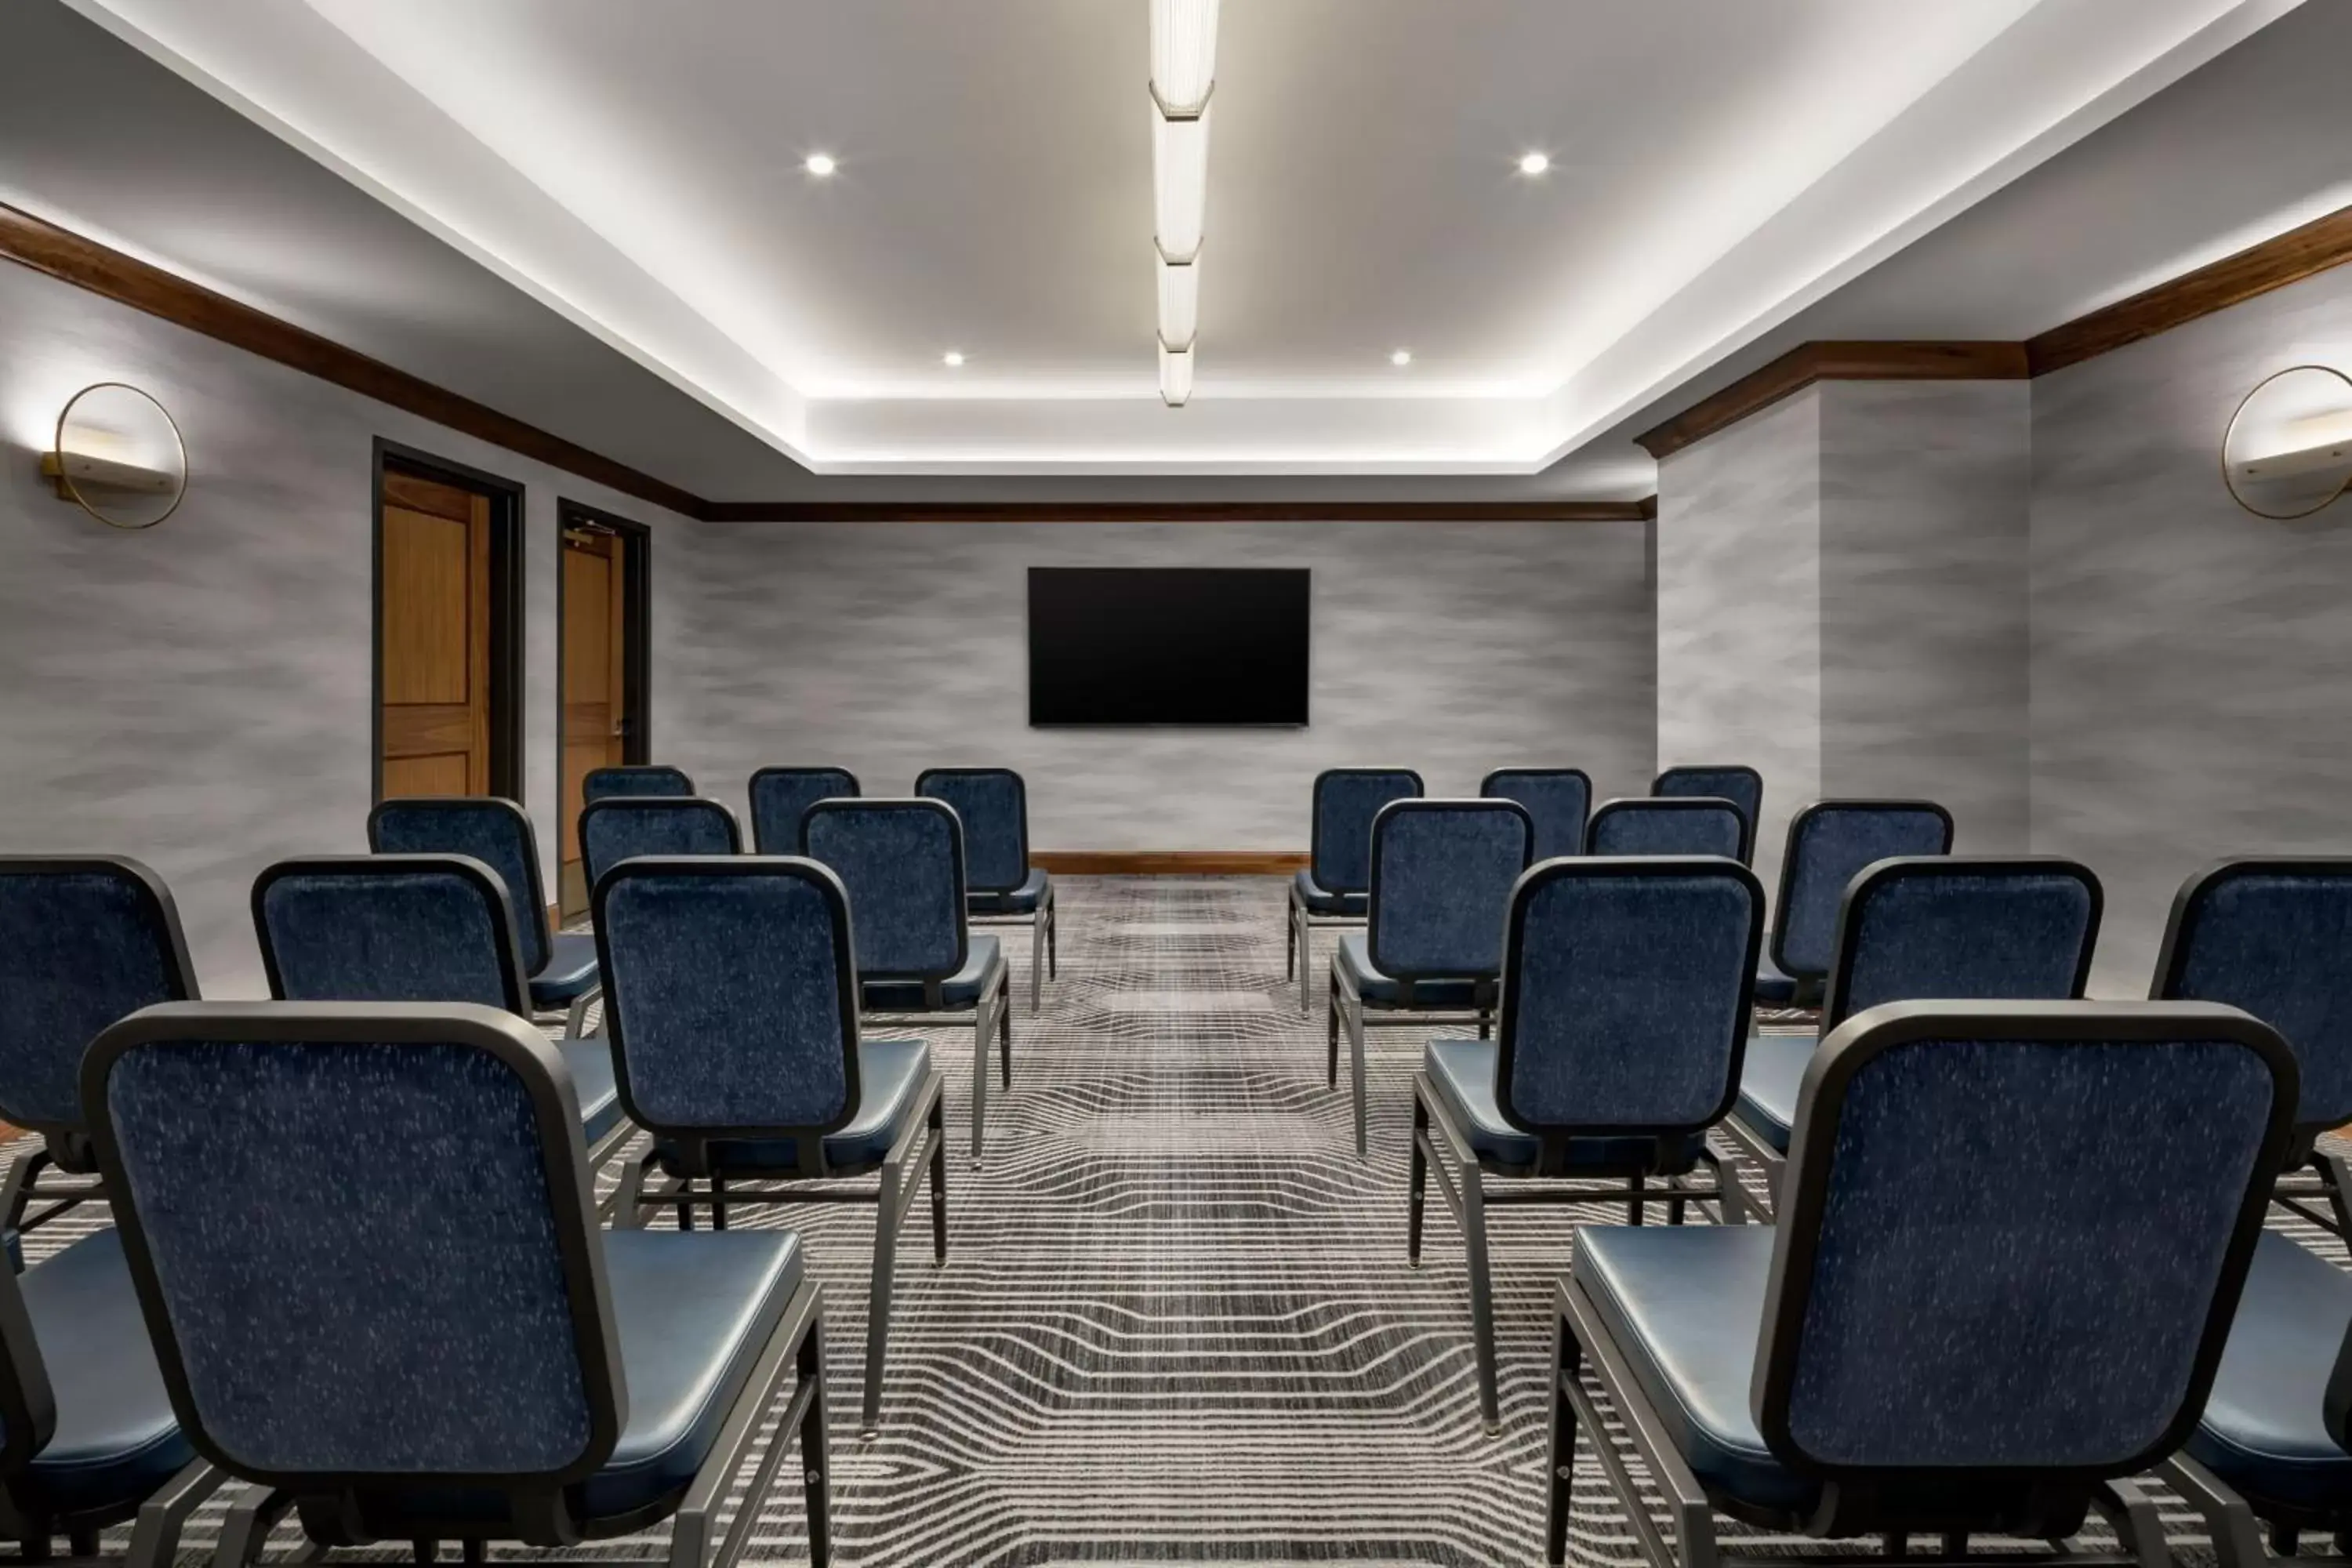 Meeting/conference room in Rand Tower Hotel, Minneapolis, a Tribute Portfolio Hotel